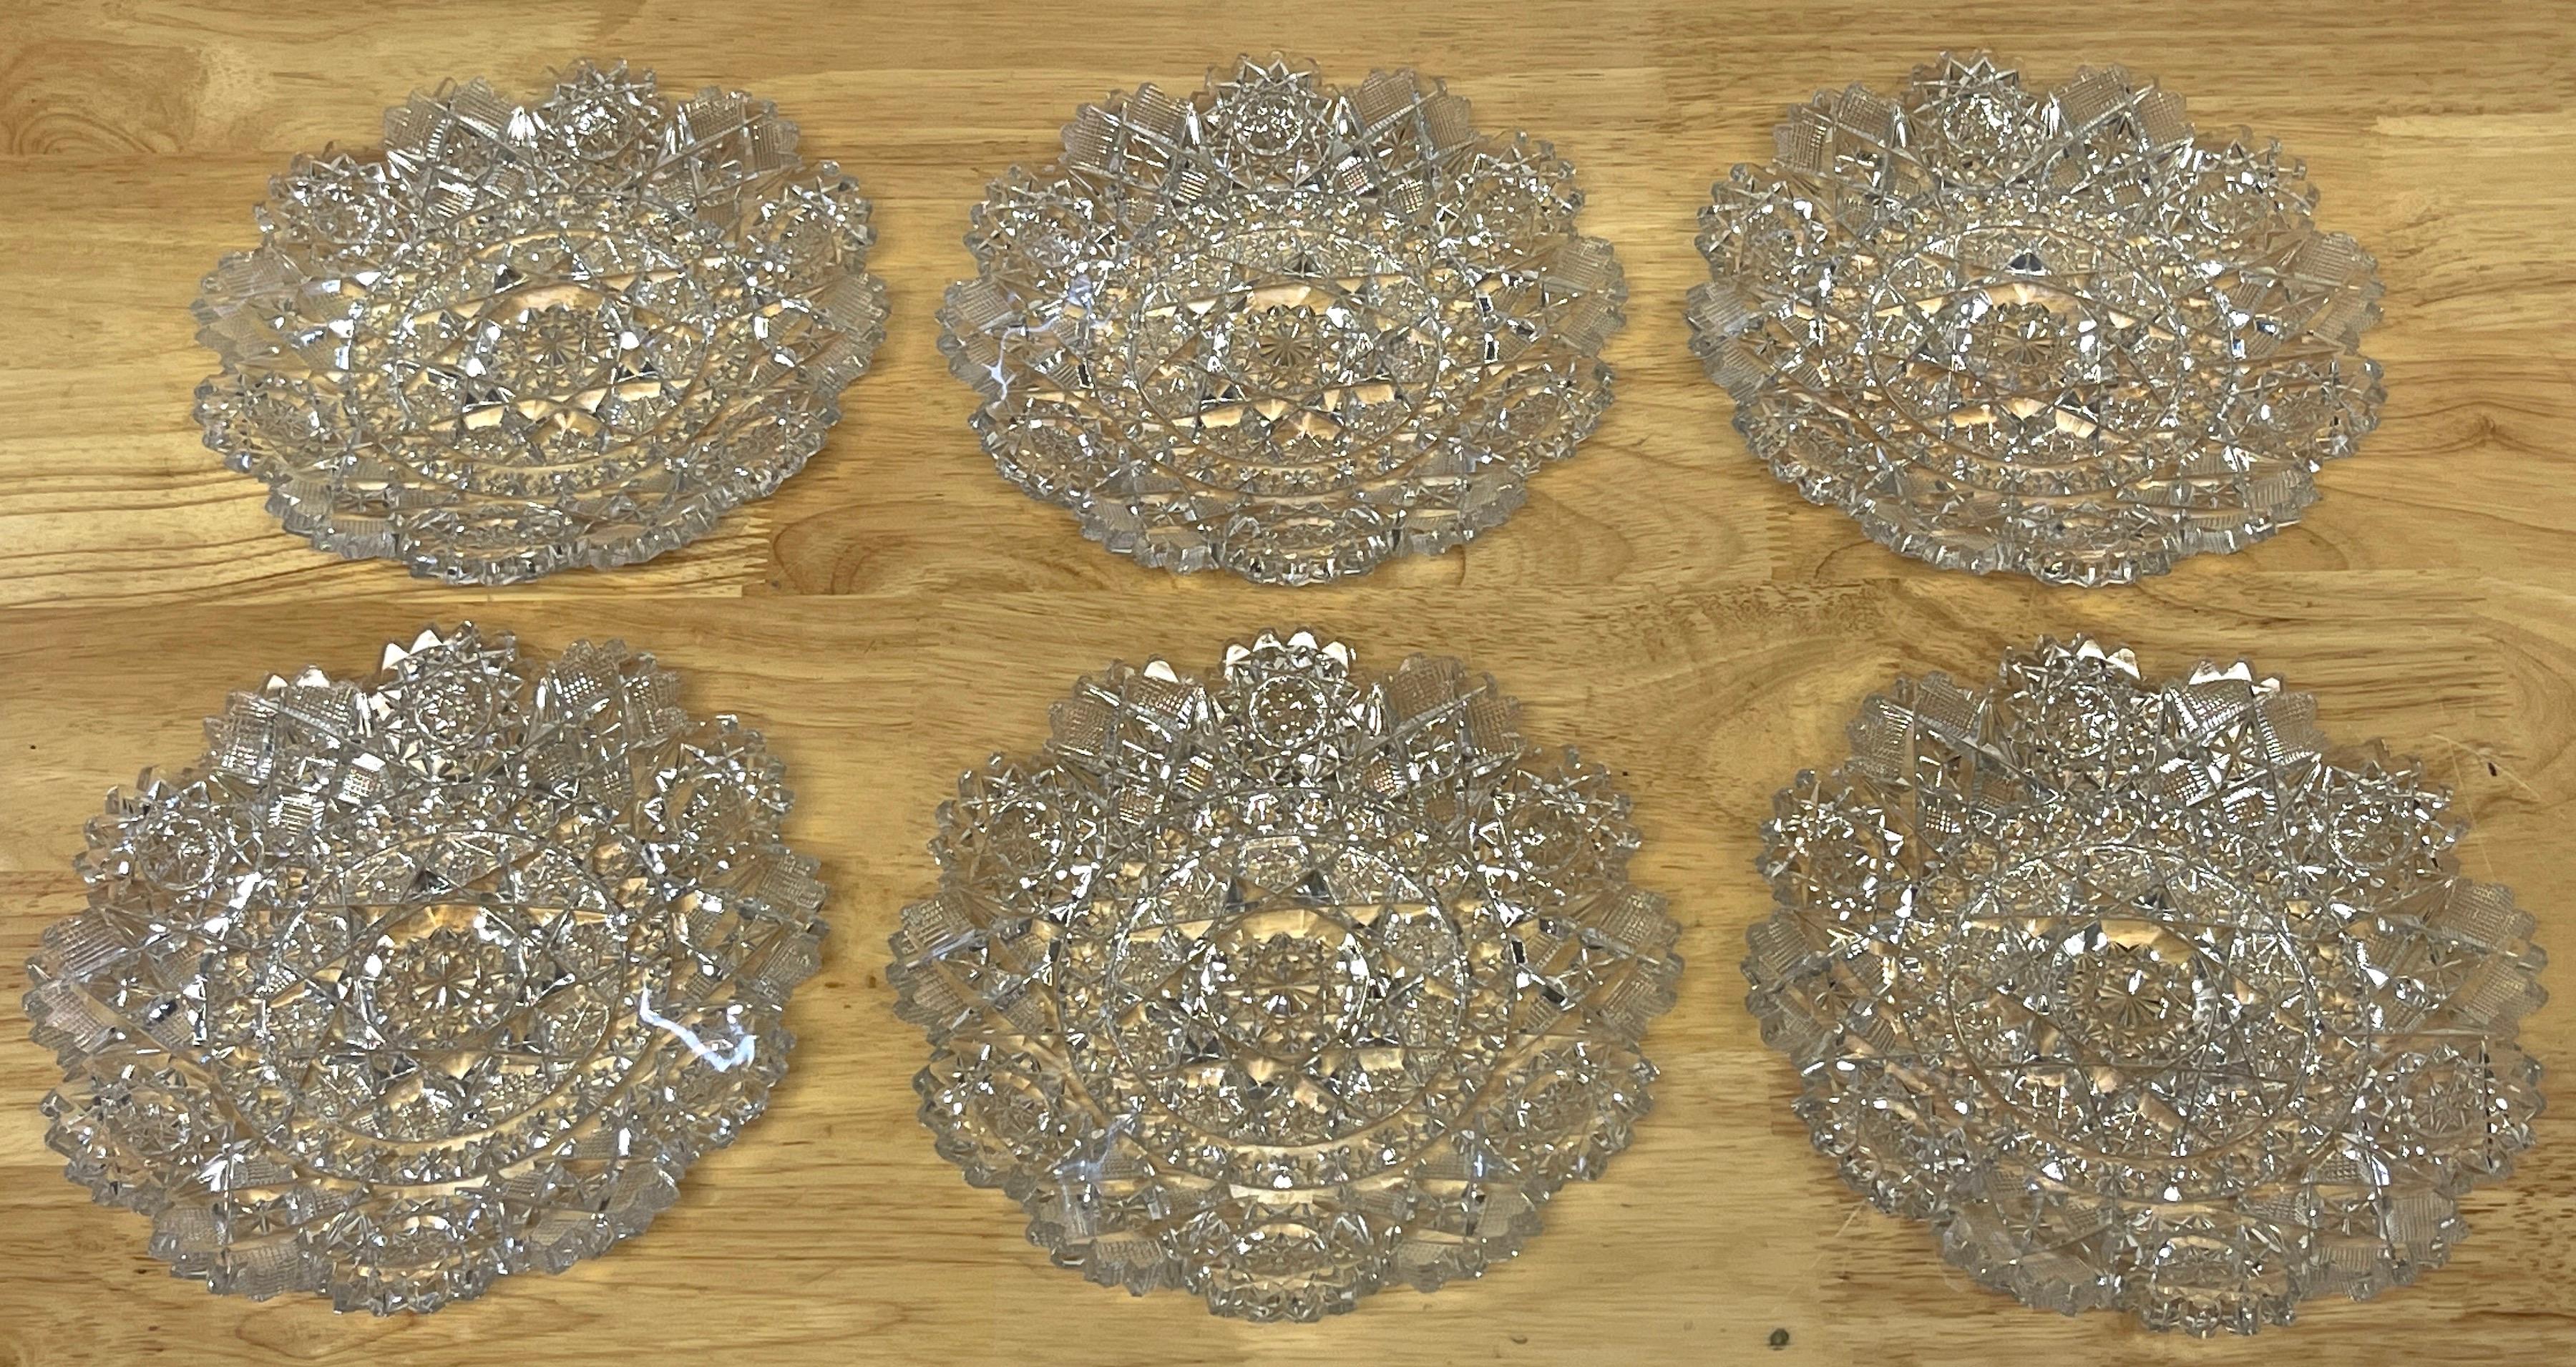 Six American brilliant cut glass 'Hobstar' dessert dishes 
A stunning set of profusely American cut glass hobstar variation pattern, possibly by J. Hoare cut glass company.
Each one of with a 7-Inch diameter.
In remarkable well cared for antique